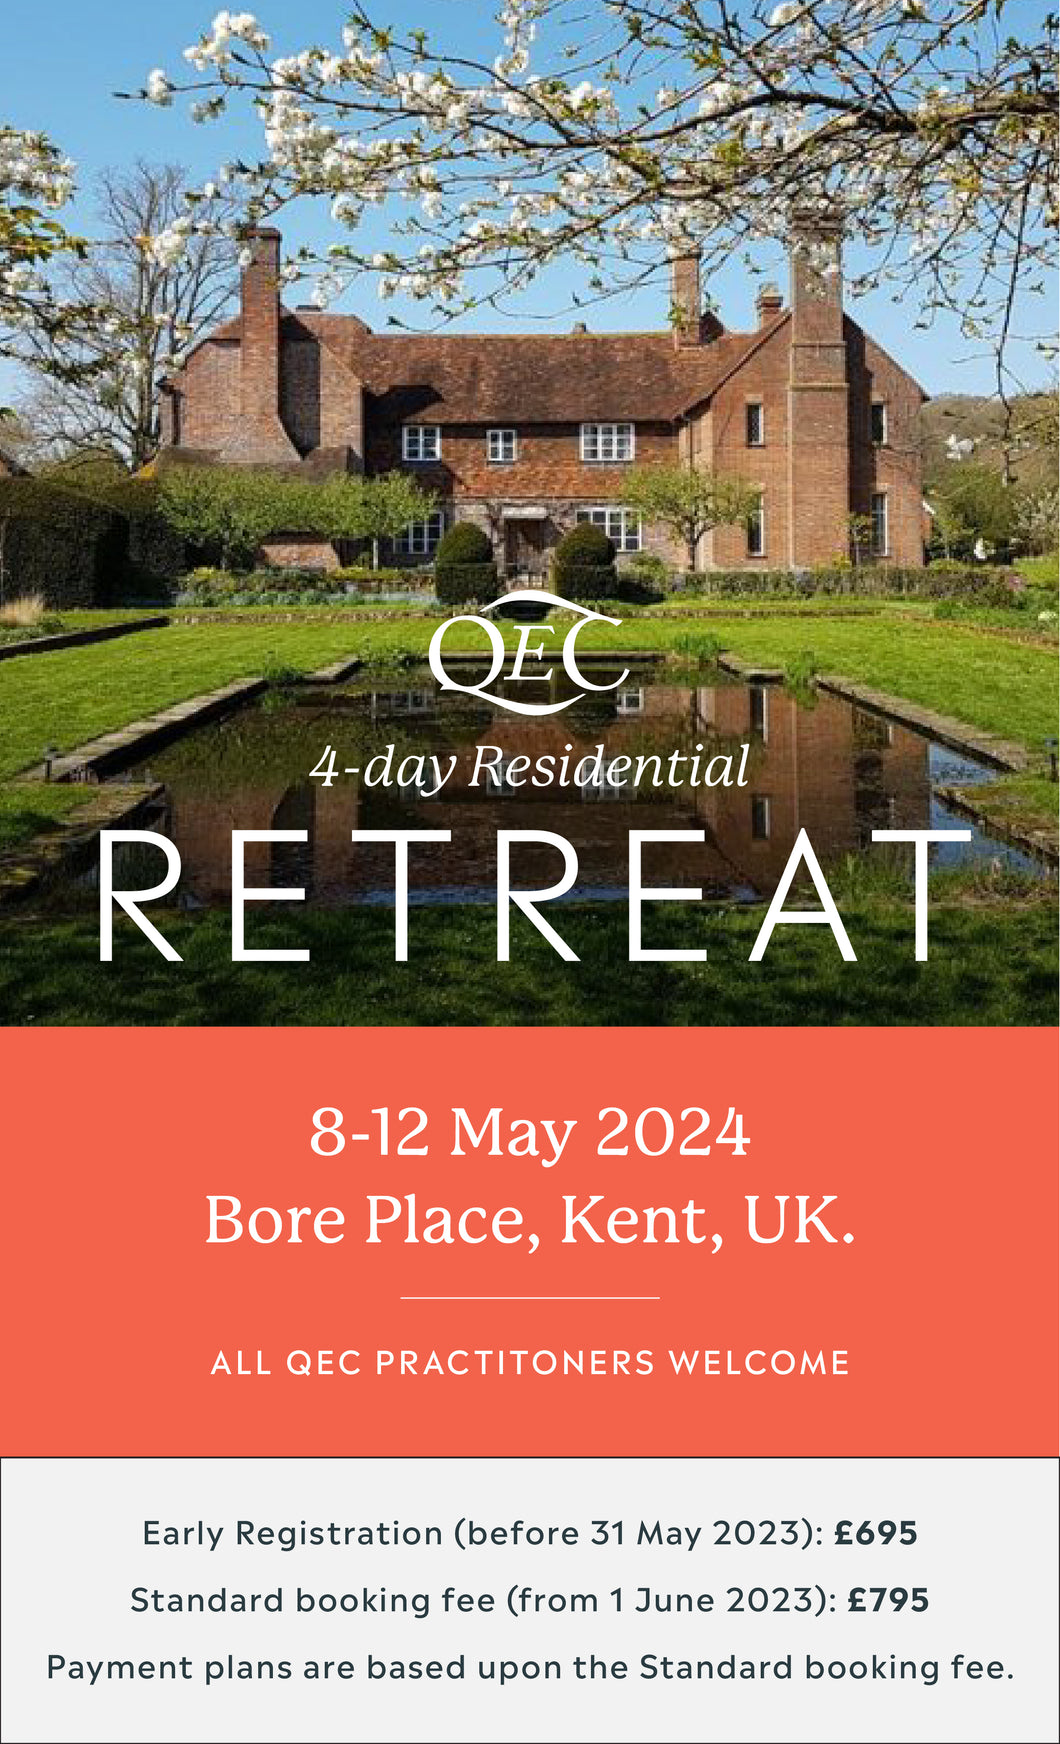 QEC 4-day Residential Retreat at Bore Place (Kent, UK). From the 8-12 May 2024.